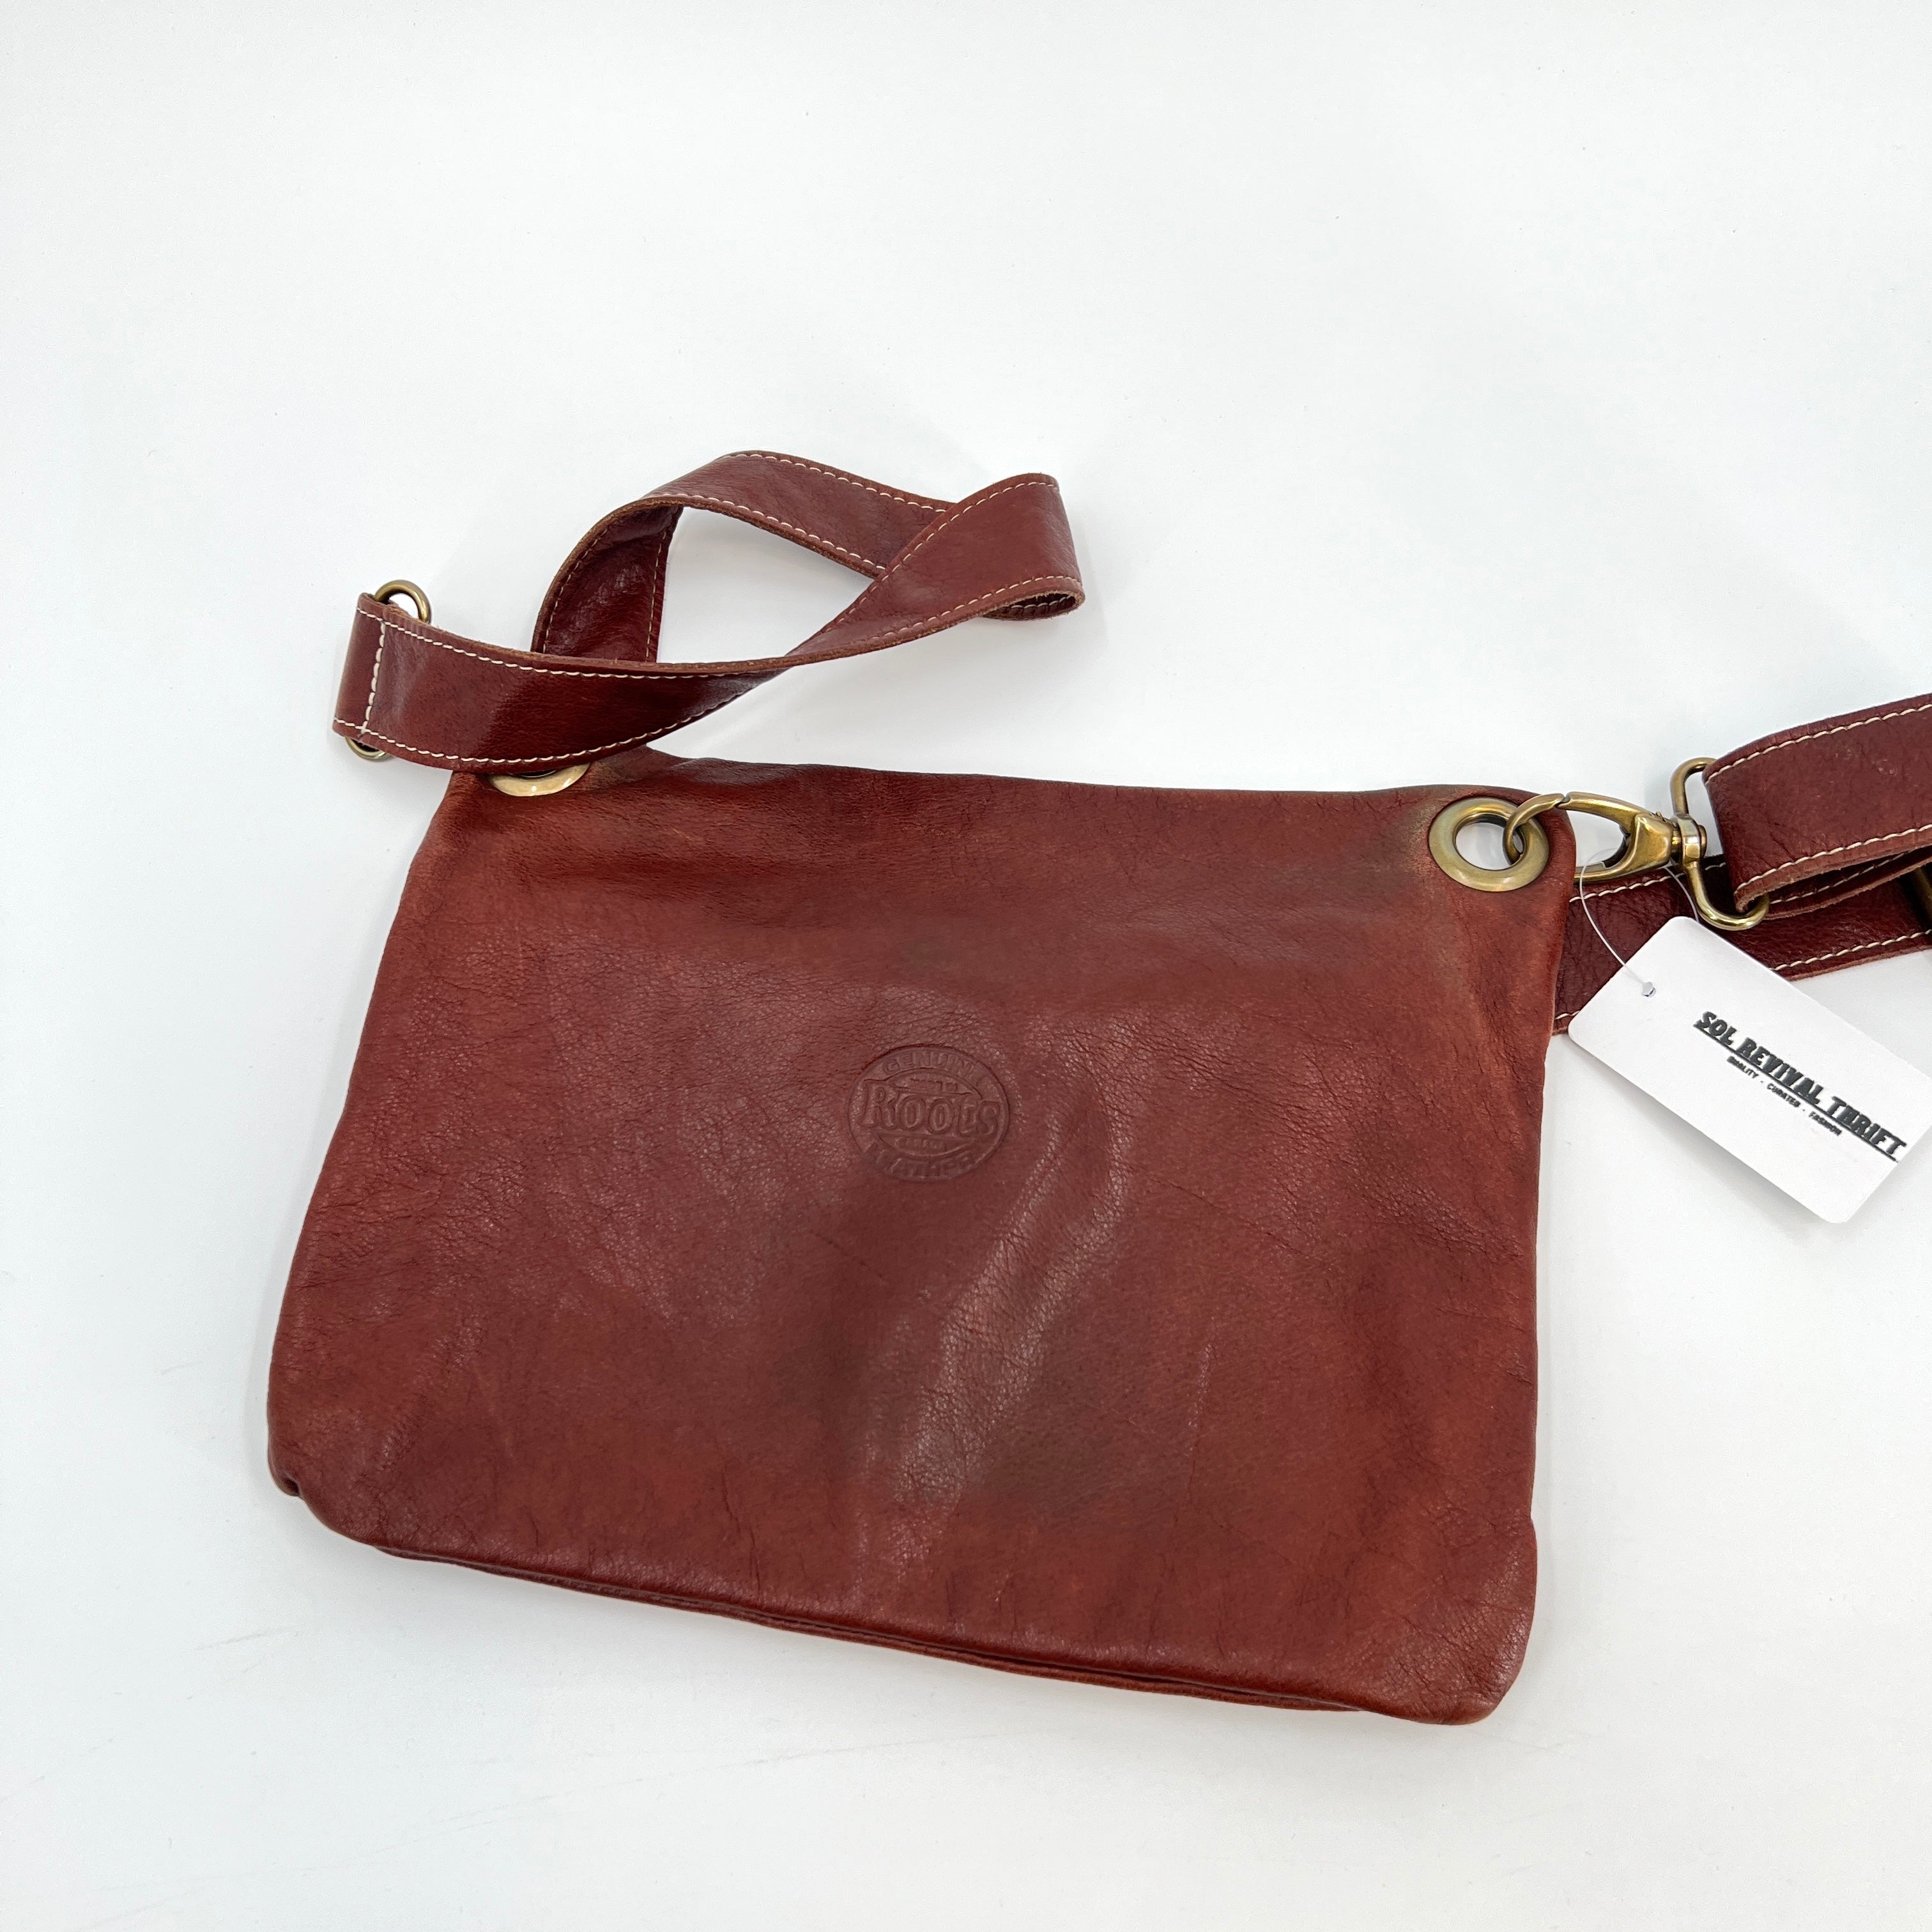 Roots | Bags | Roots Leather Cosmetic Bag | Poshmark